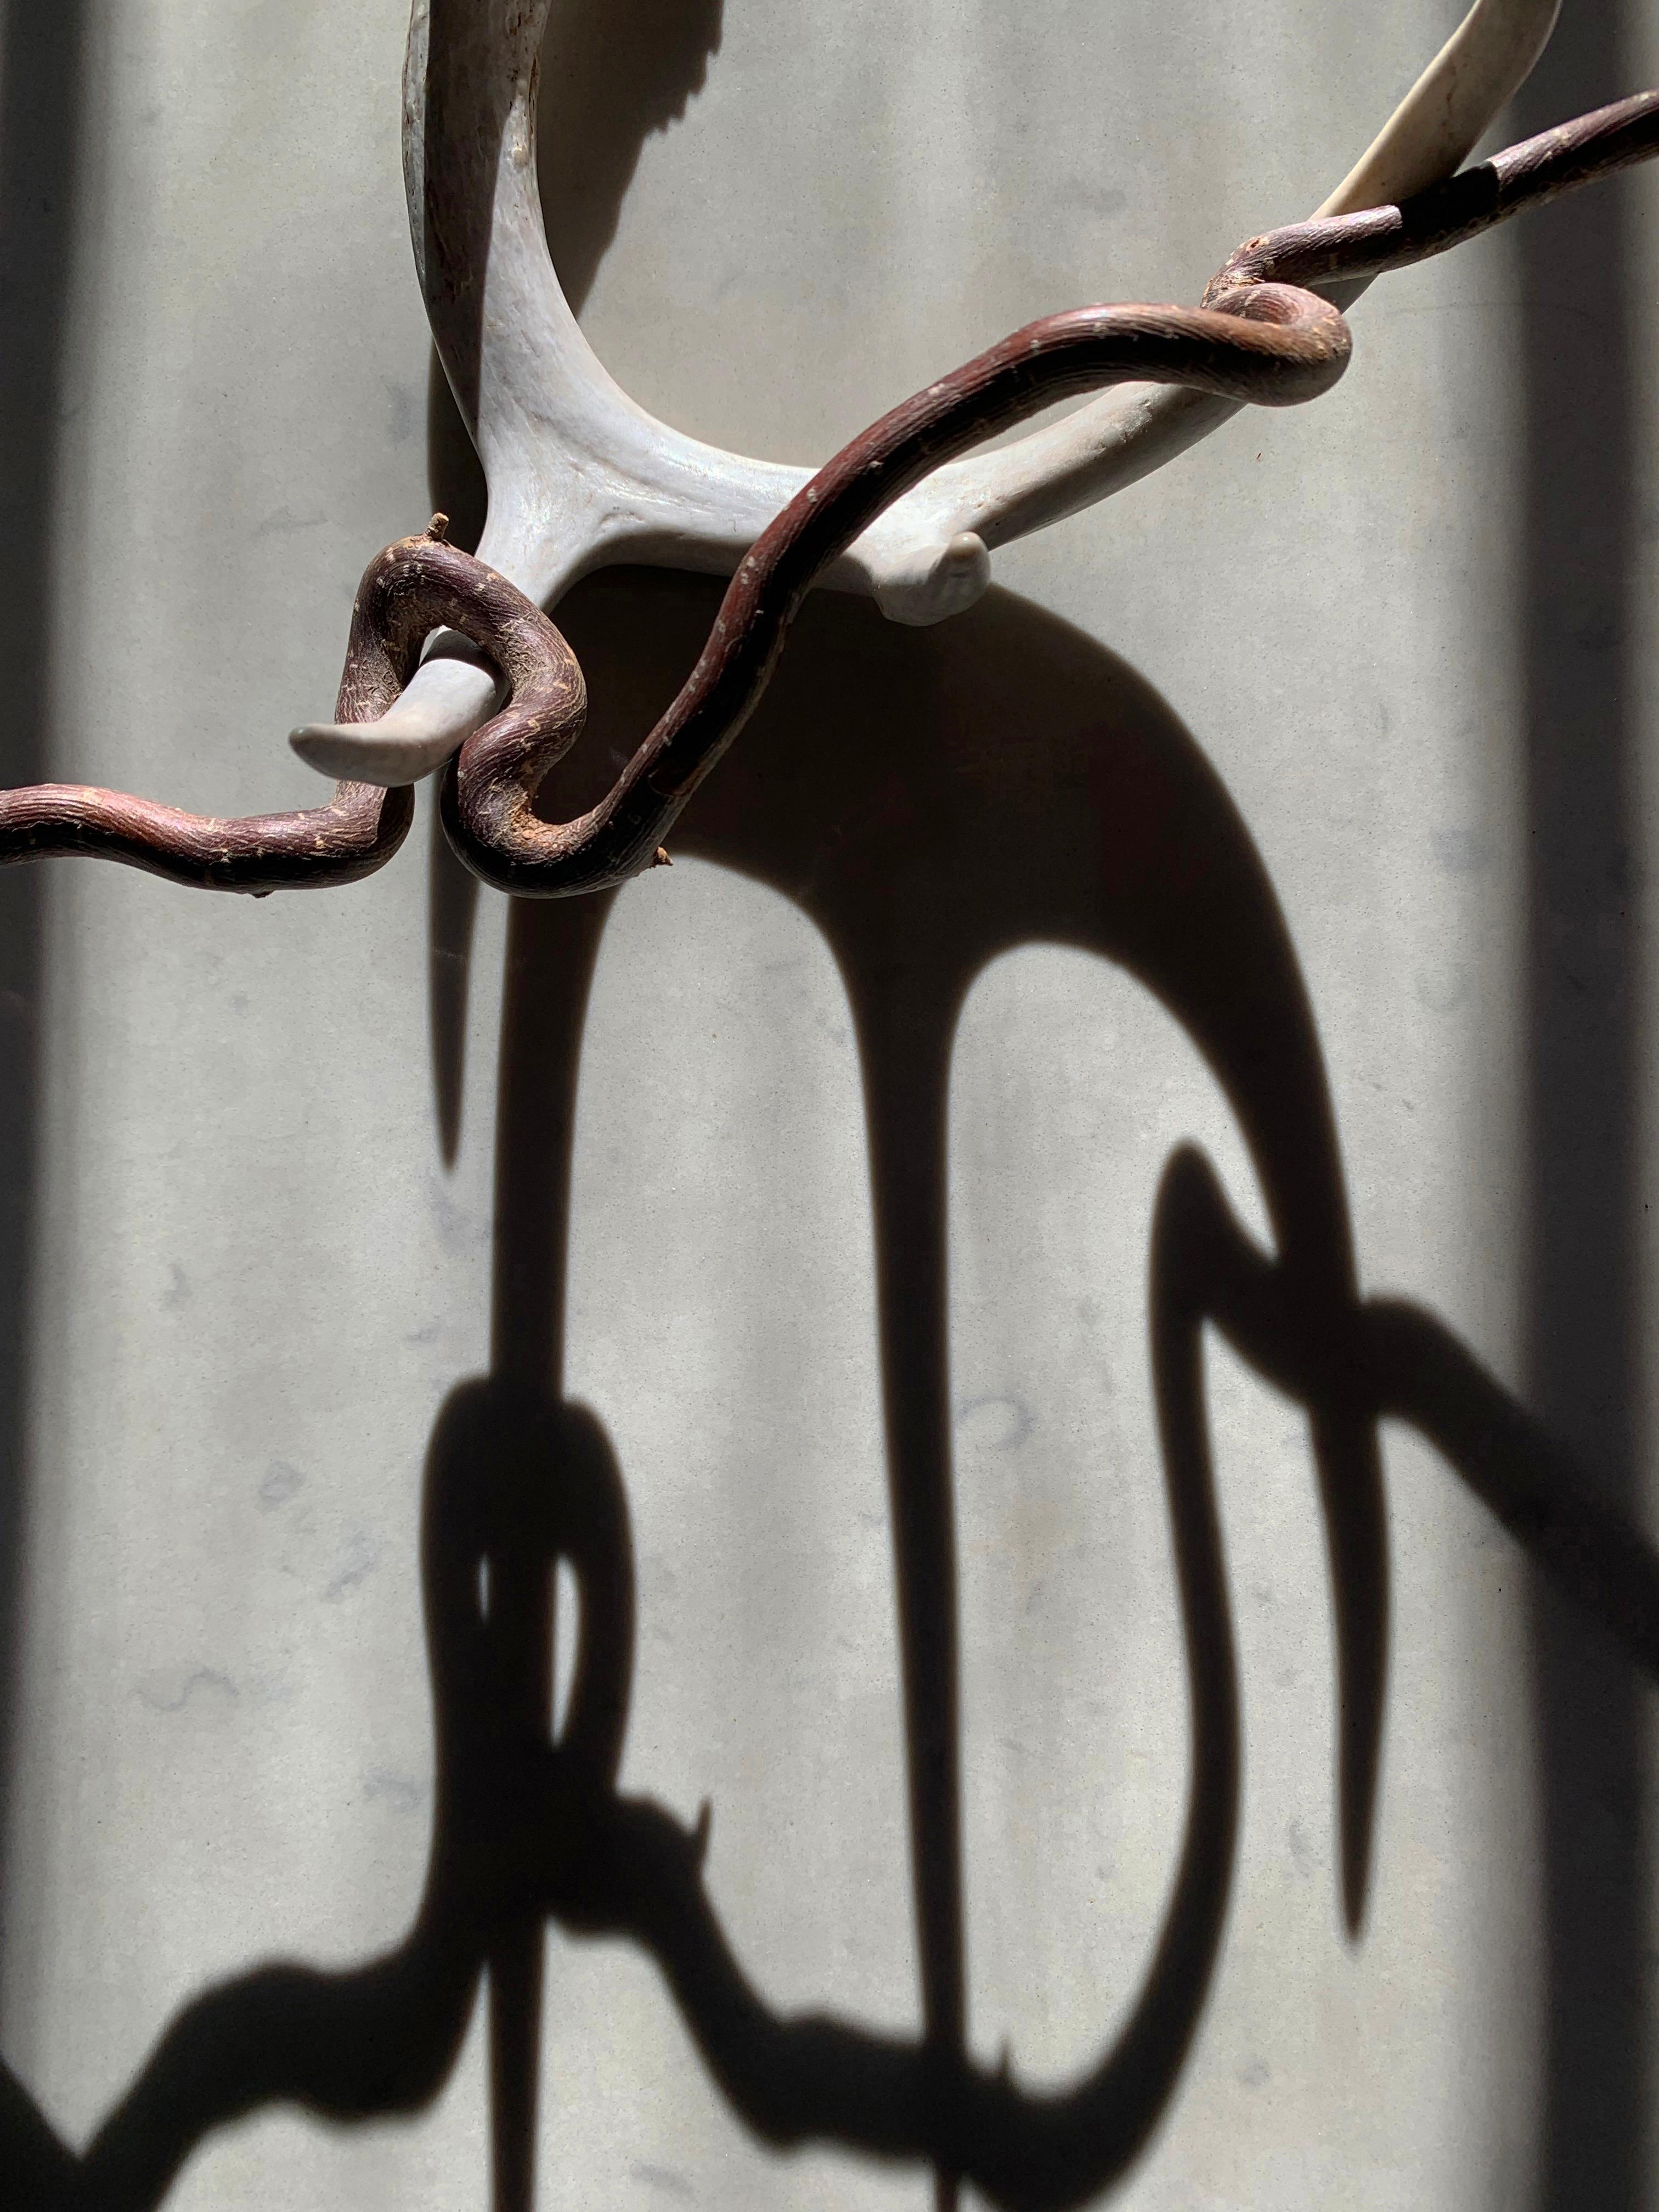 Untitled (2159): still life photograph with antler and abstract shadow patterns